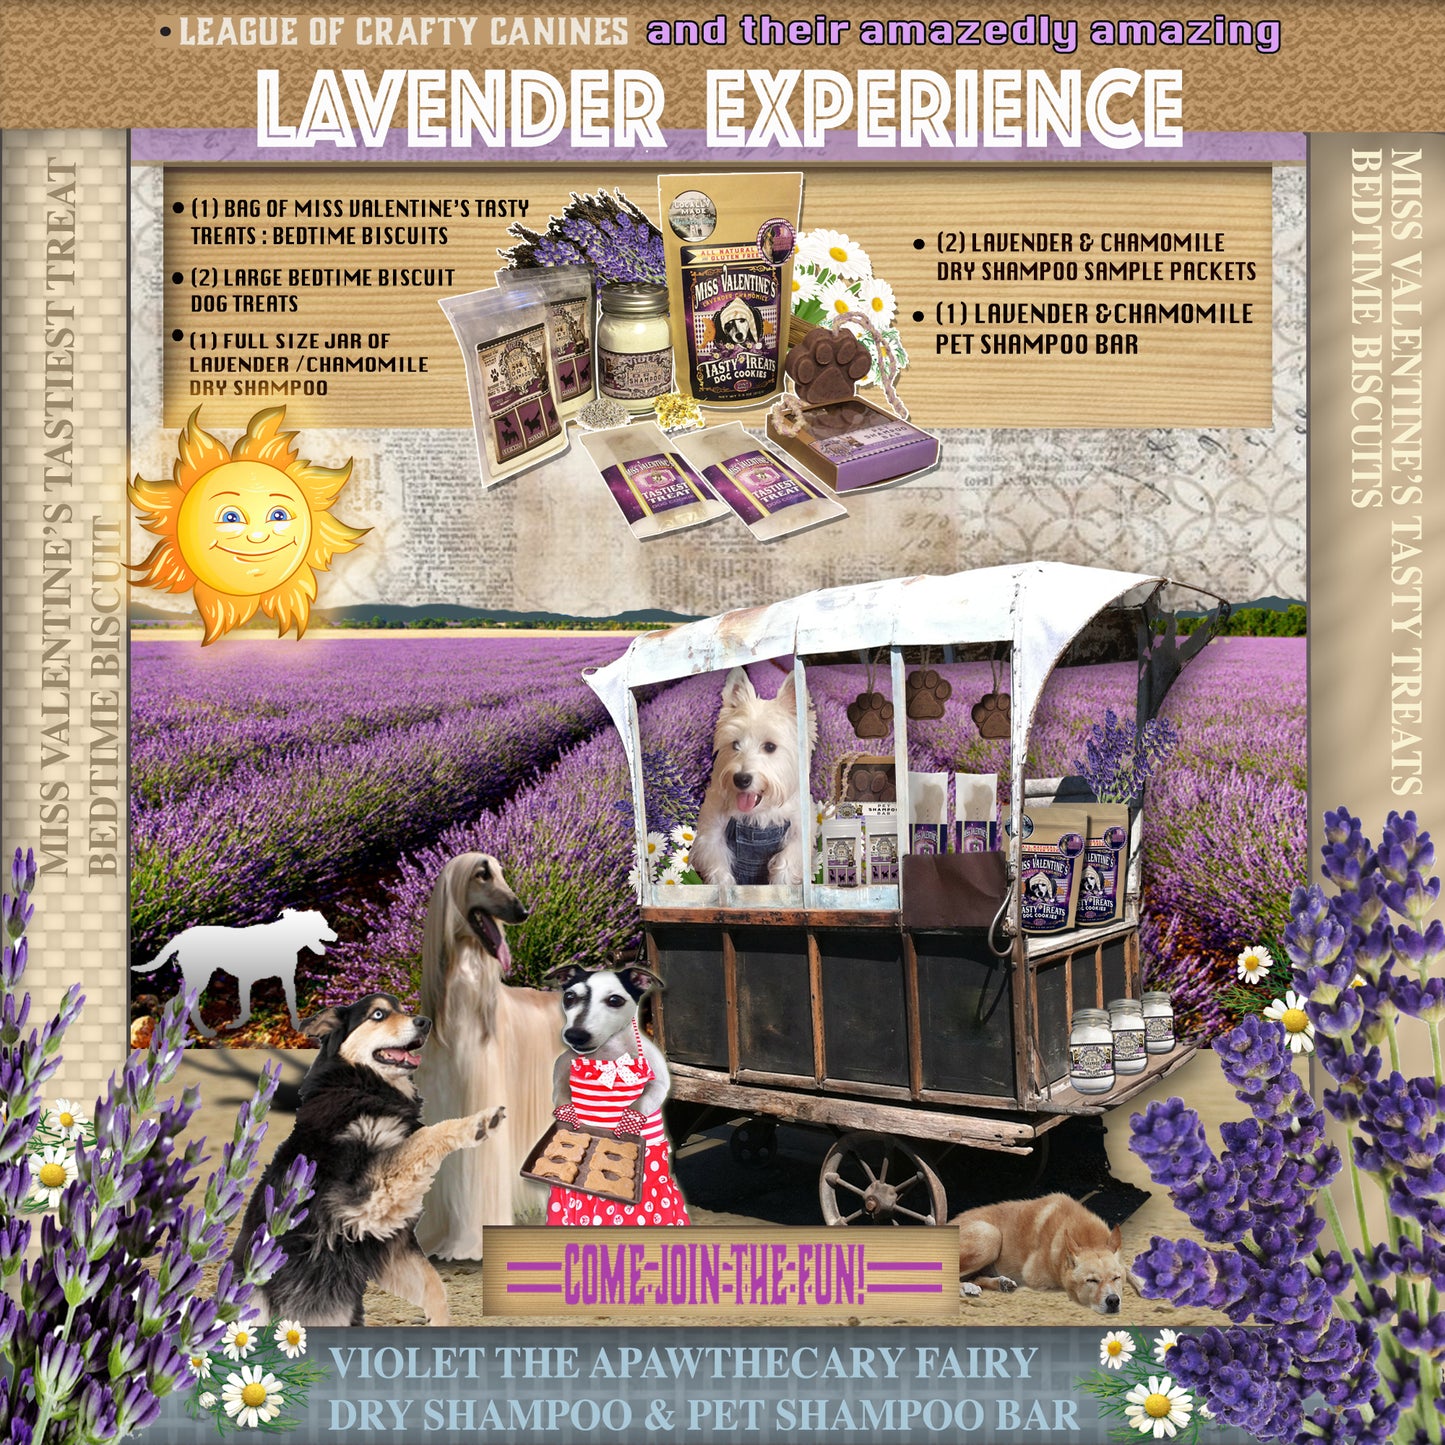 The League of Crafty Canines presents : The Lavender Experience - LEAGUE OF CRAFTY CANINES